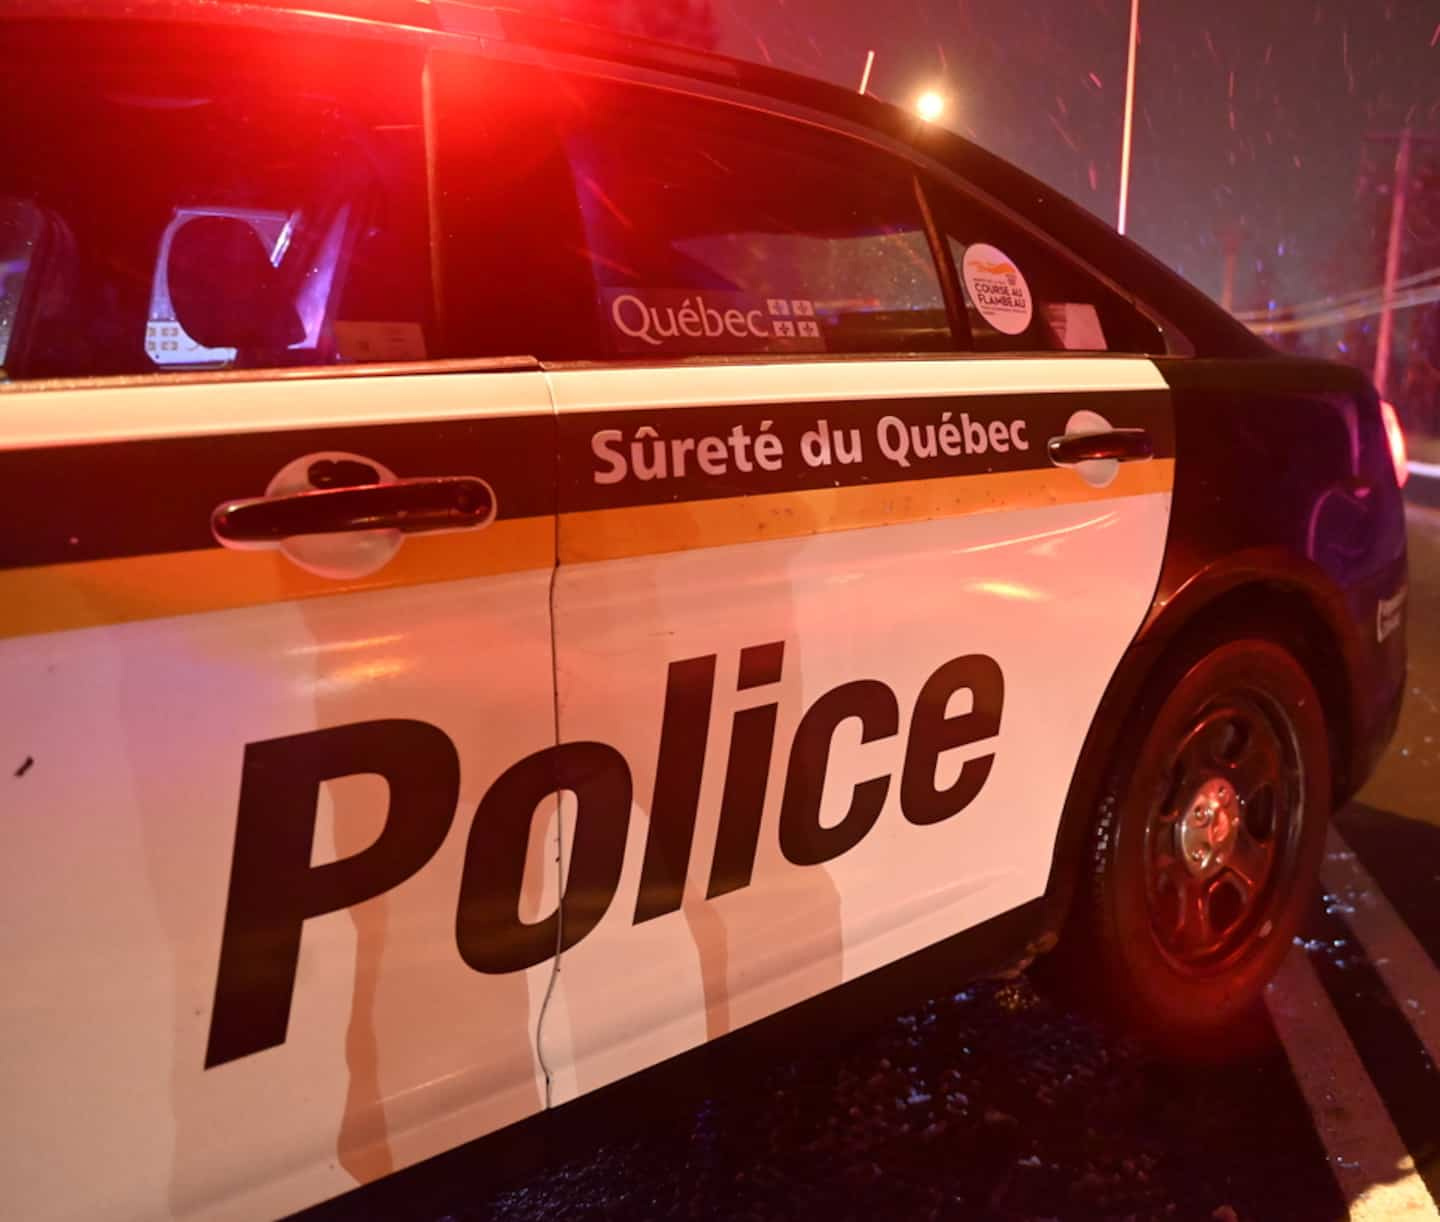 Montmagny: a motorcyclist pursued seriously injured